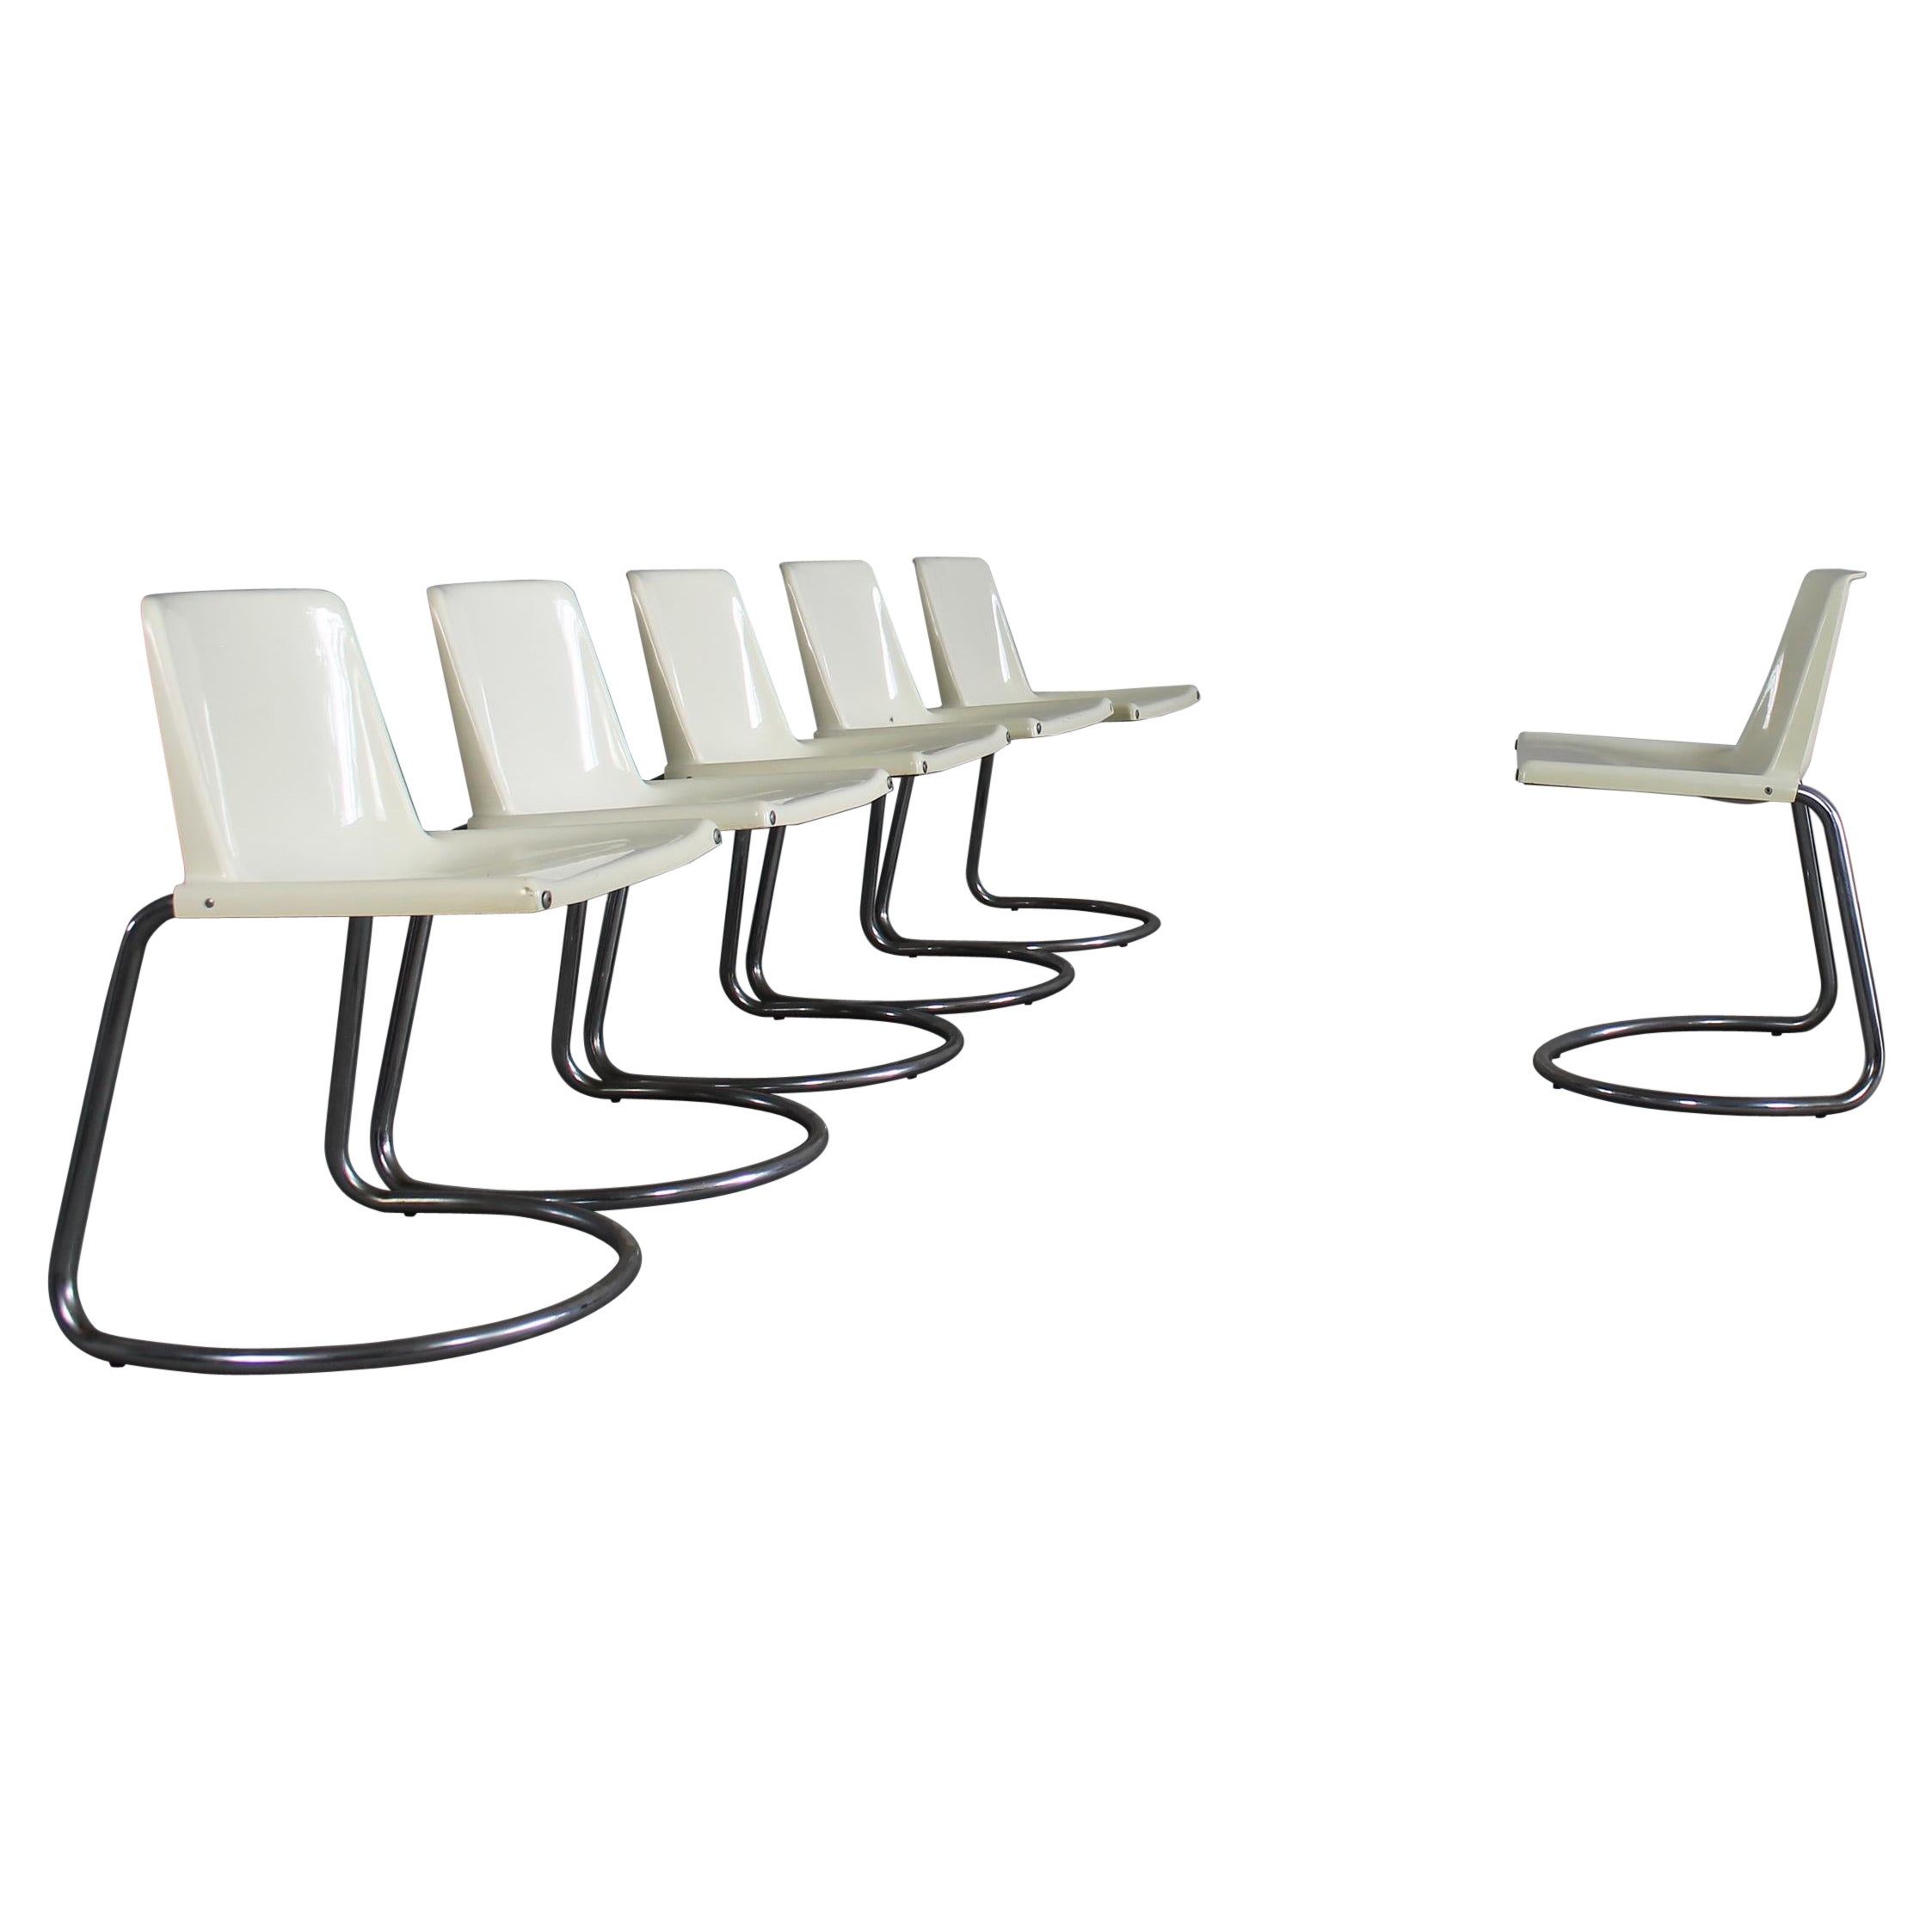 Giotto Stoppino Set of Six White Alessia Chairs by Driade 1970s Italy